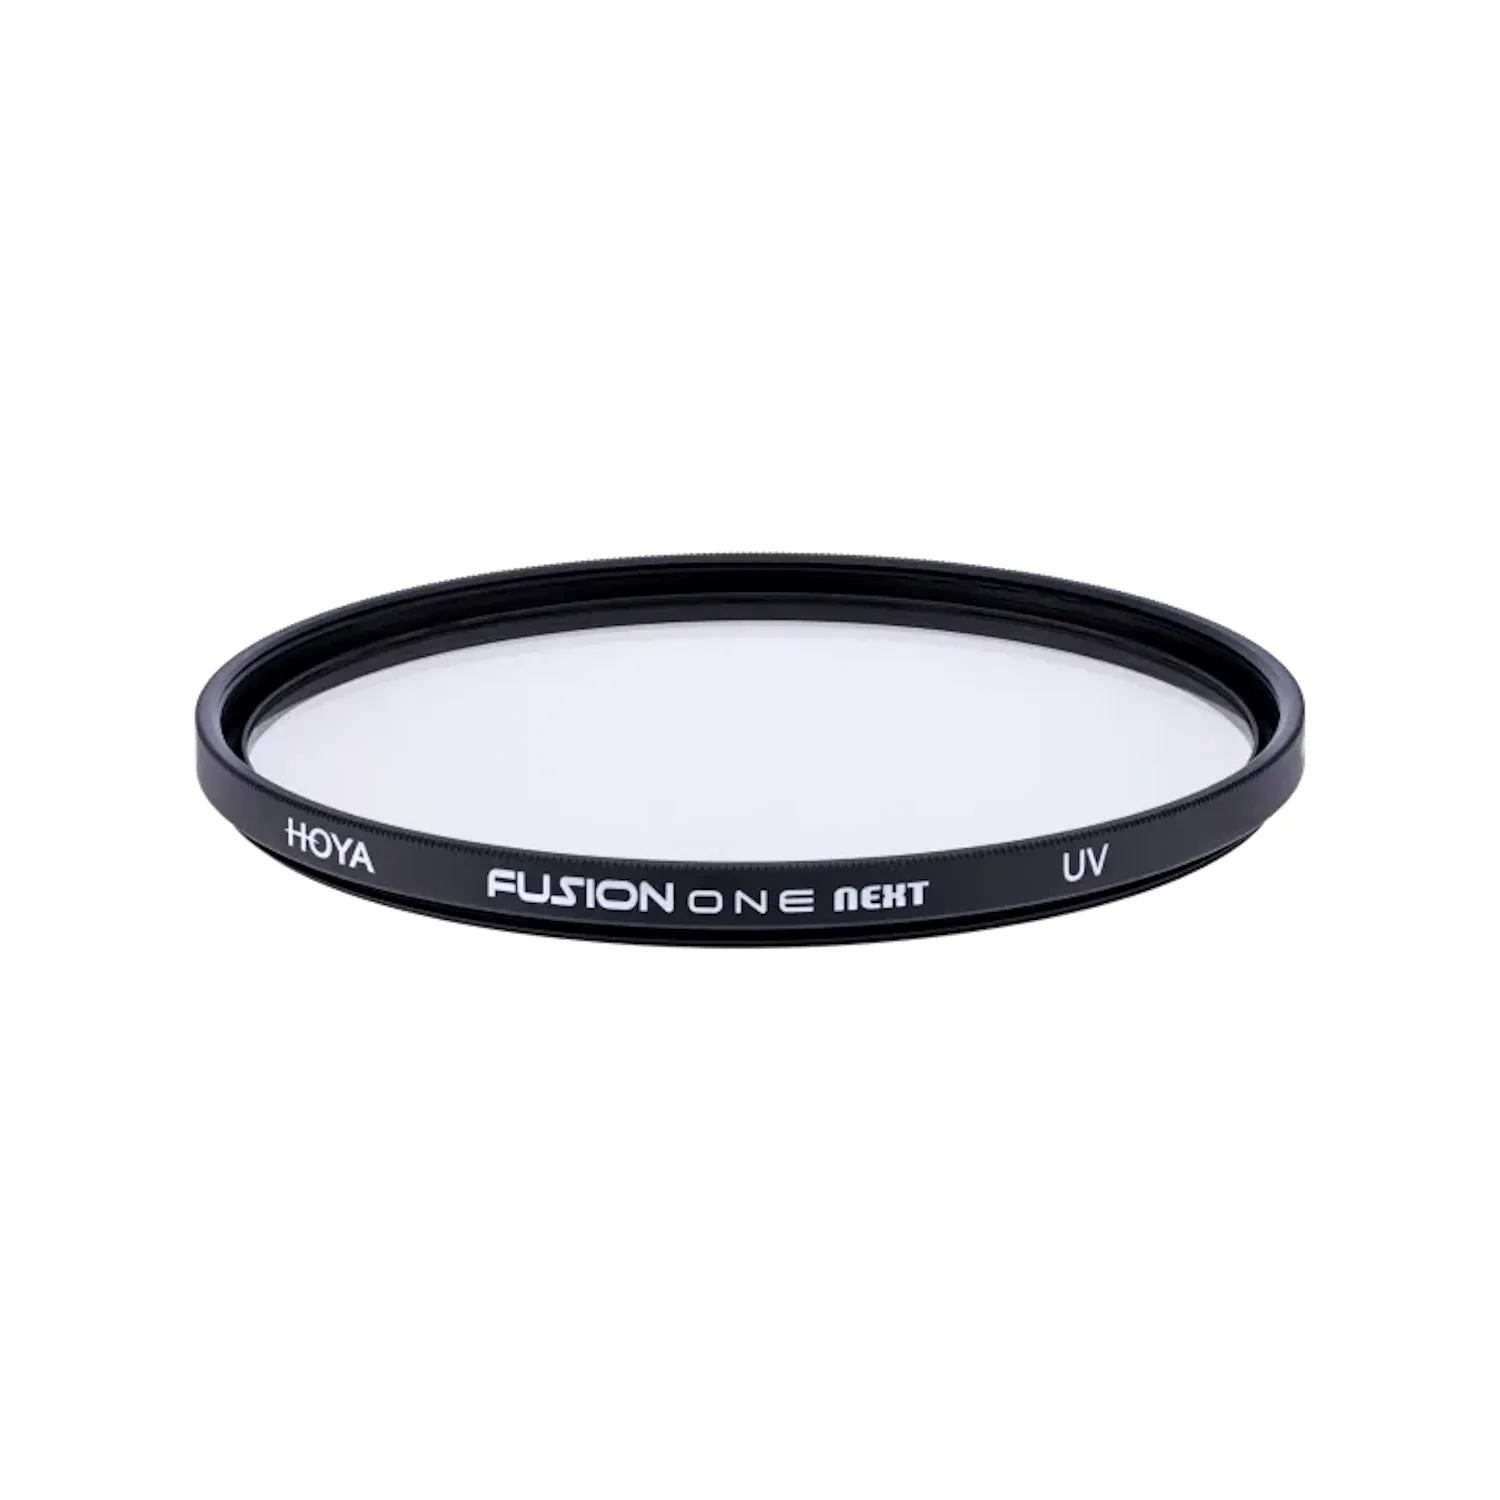 Hoya 40.5mm Fusion ONE Next UV Filter for Pentax 17